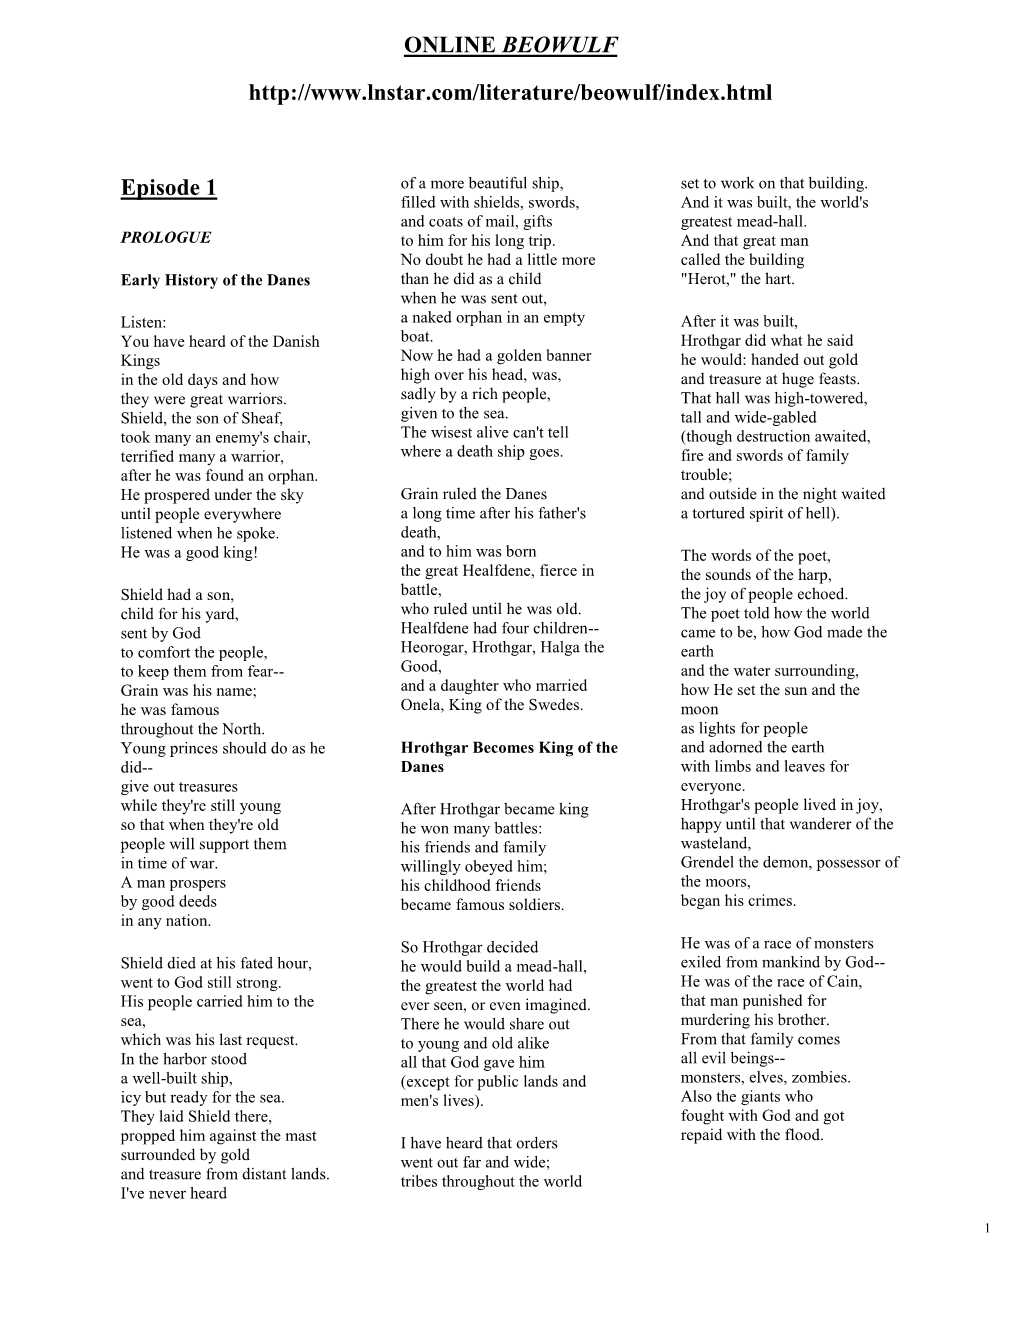 Revised ONLINE BEOWULF PRINT VERSION 3 Columns 25 Pages.Pdf